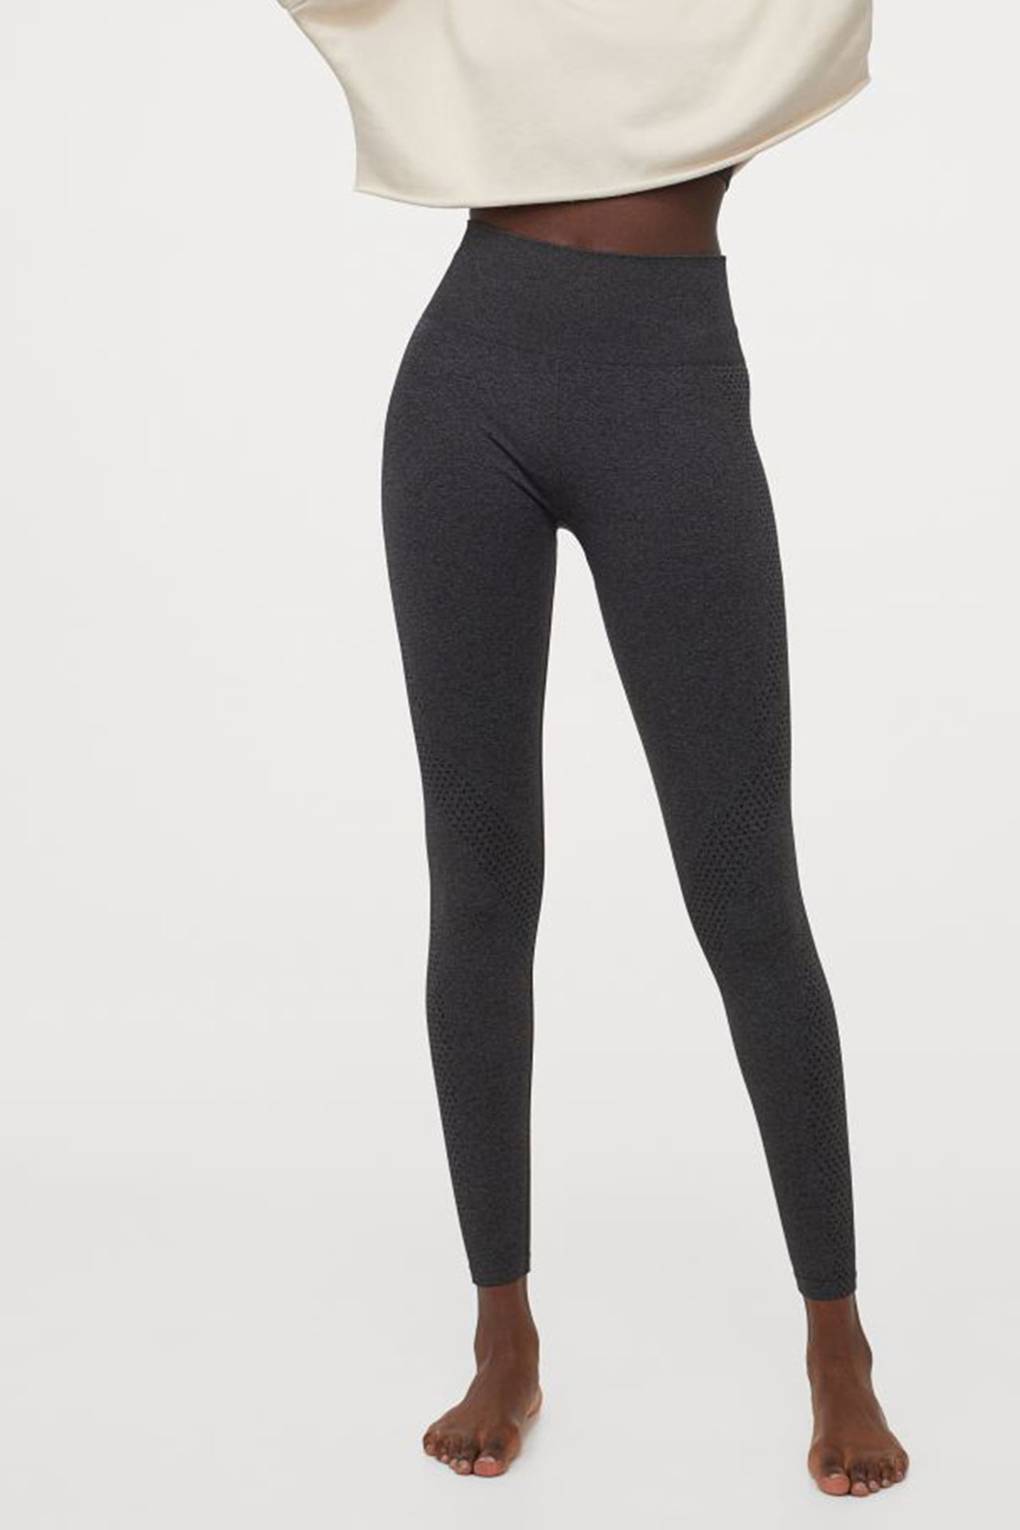 17 Best Gym Leggings For Every Workout: Sweat-Wicking & Supportive ...